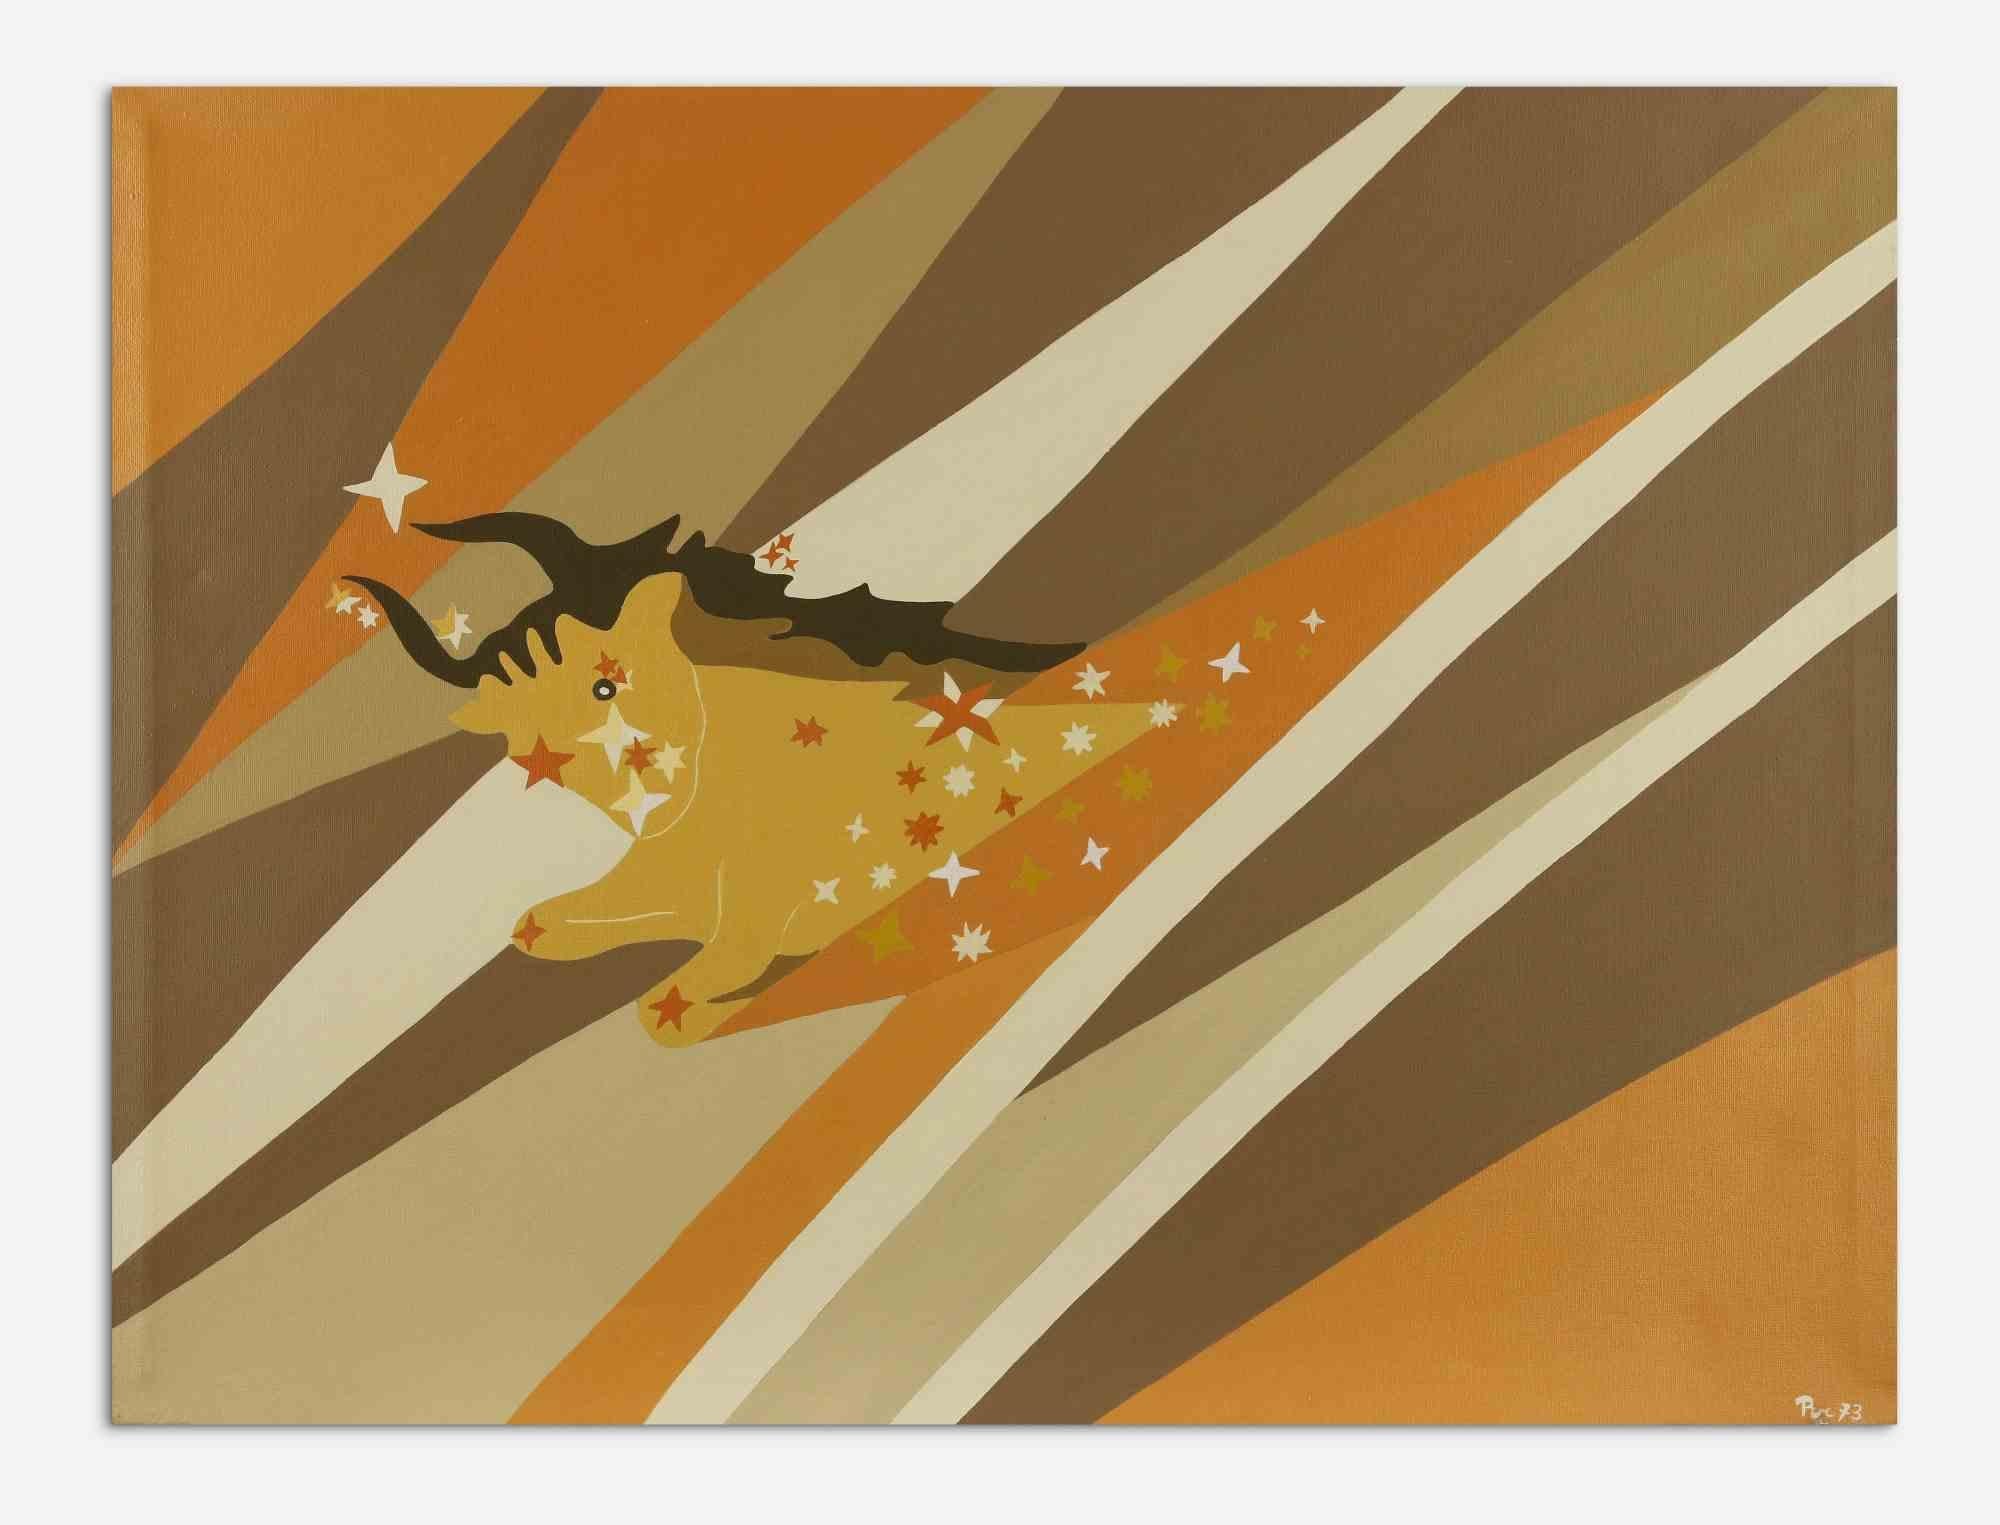 Taurus is a contemporary artwork realized by Genny Puccini in 1973.

Acrylic on canvas.

Signed and dated by the artist on the lower margin.

This colorful artwork is the perfect lively decor for your home,